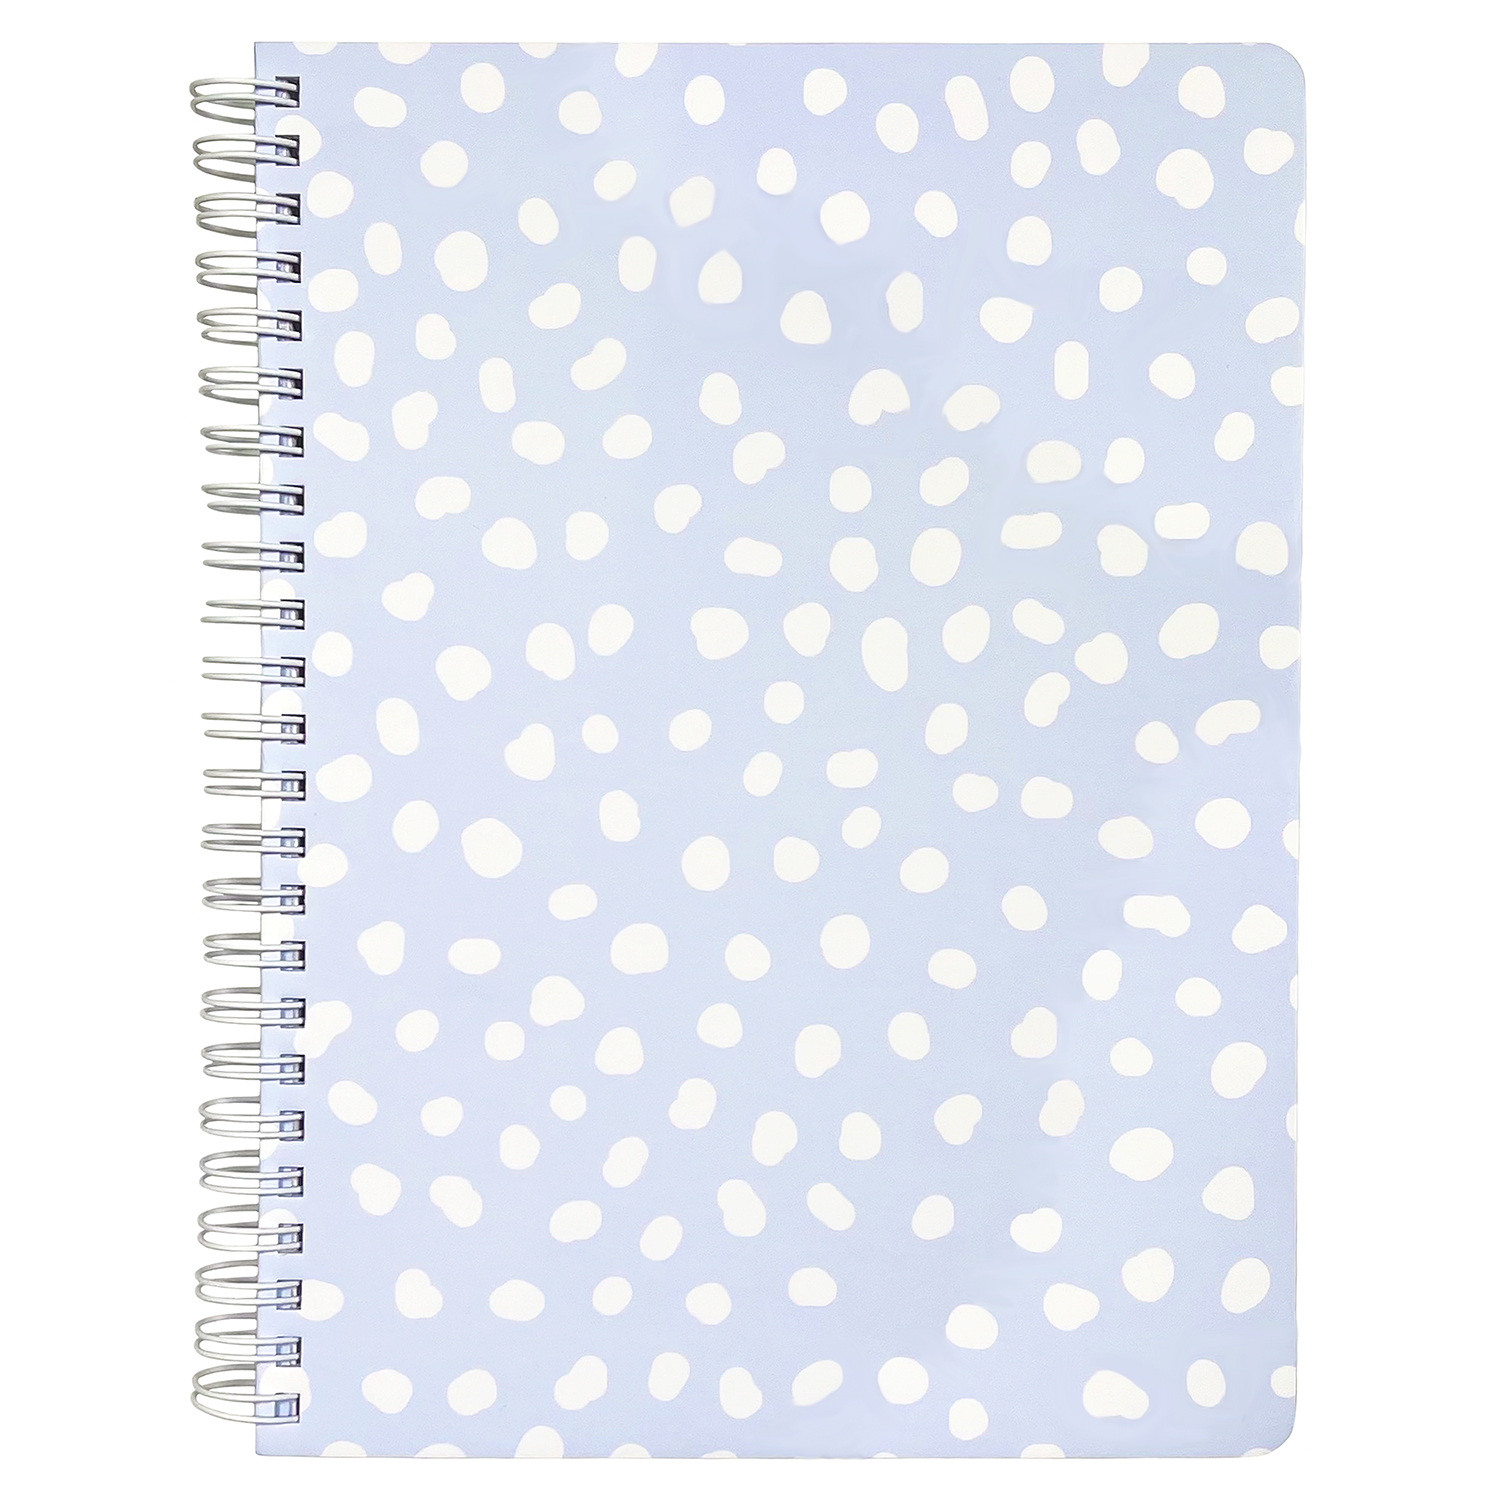 light blue mini spiral notebook with white dot hardcover, metal spiral and 160 lined pages for school or office supplies